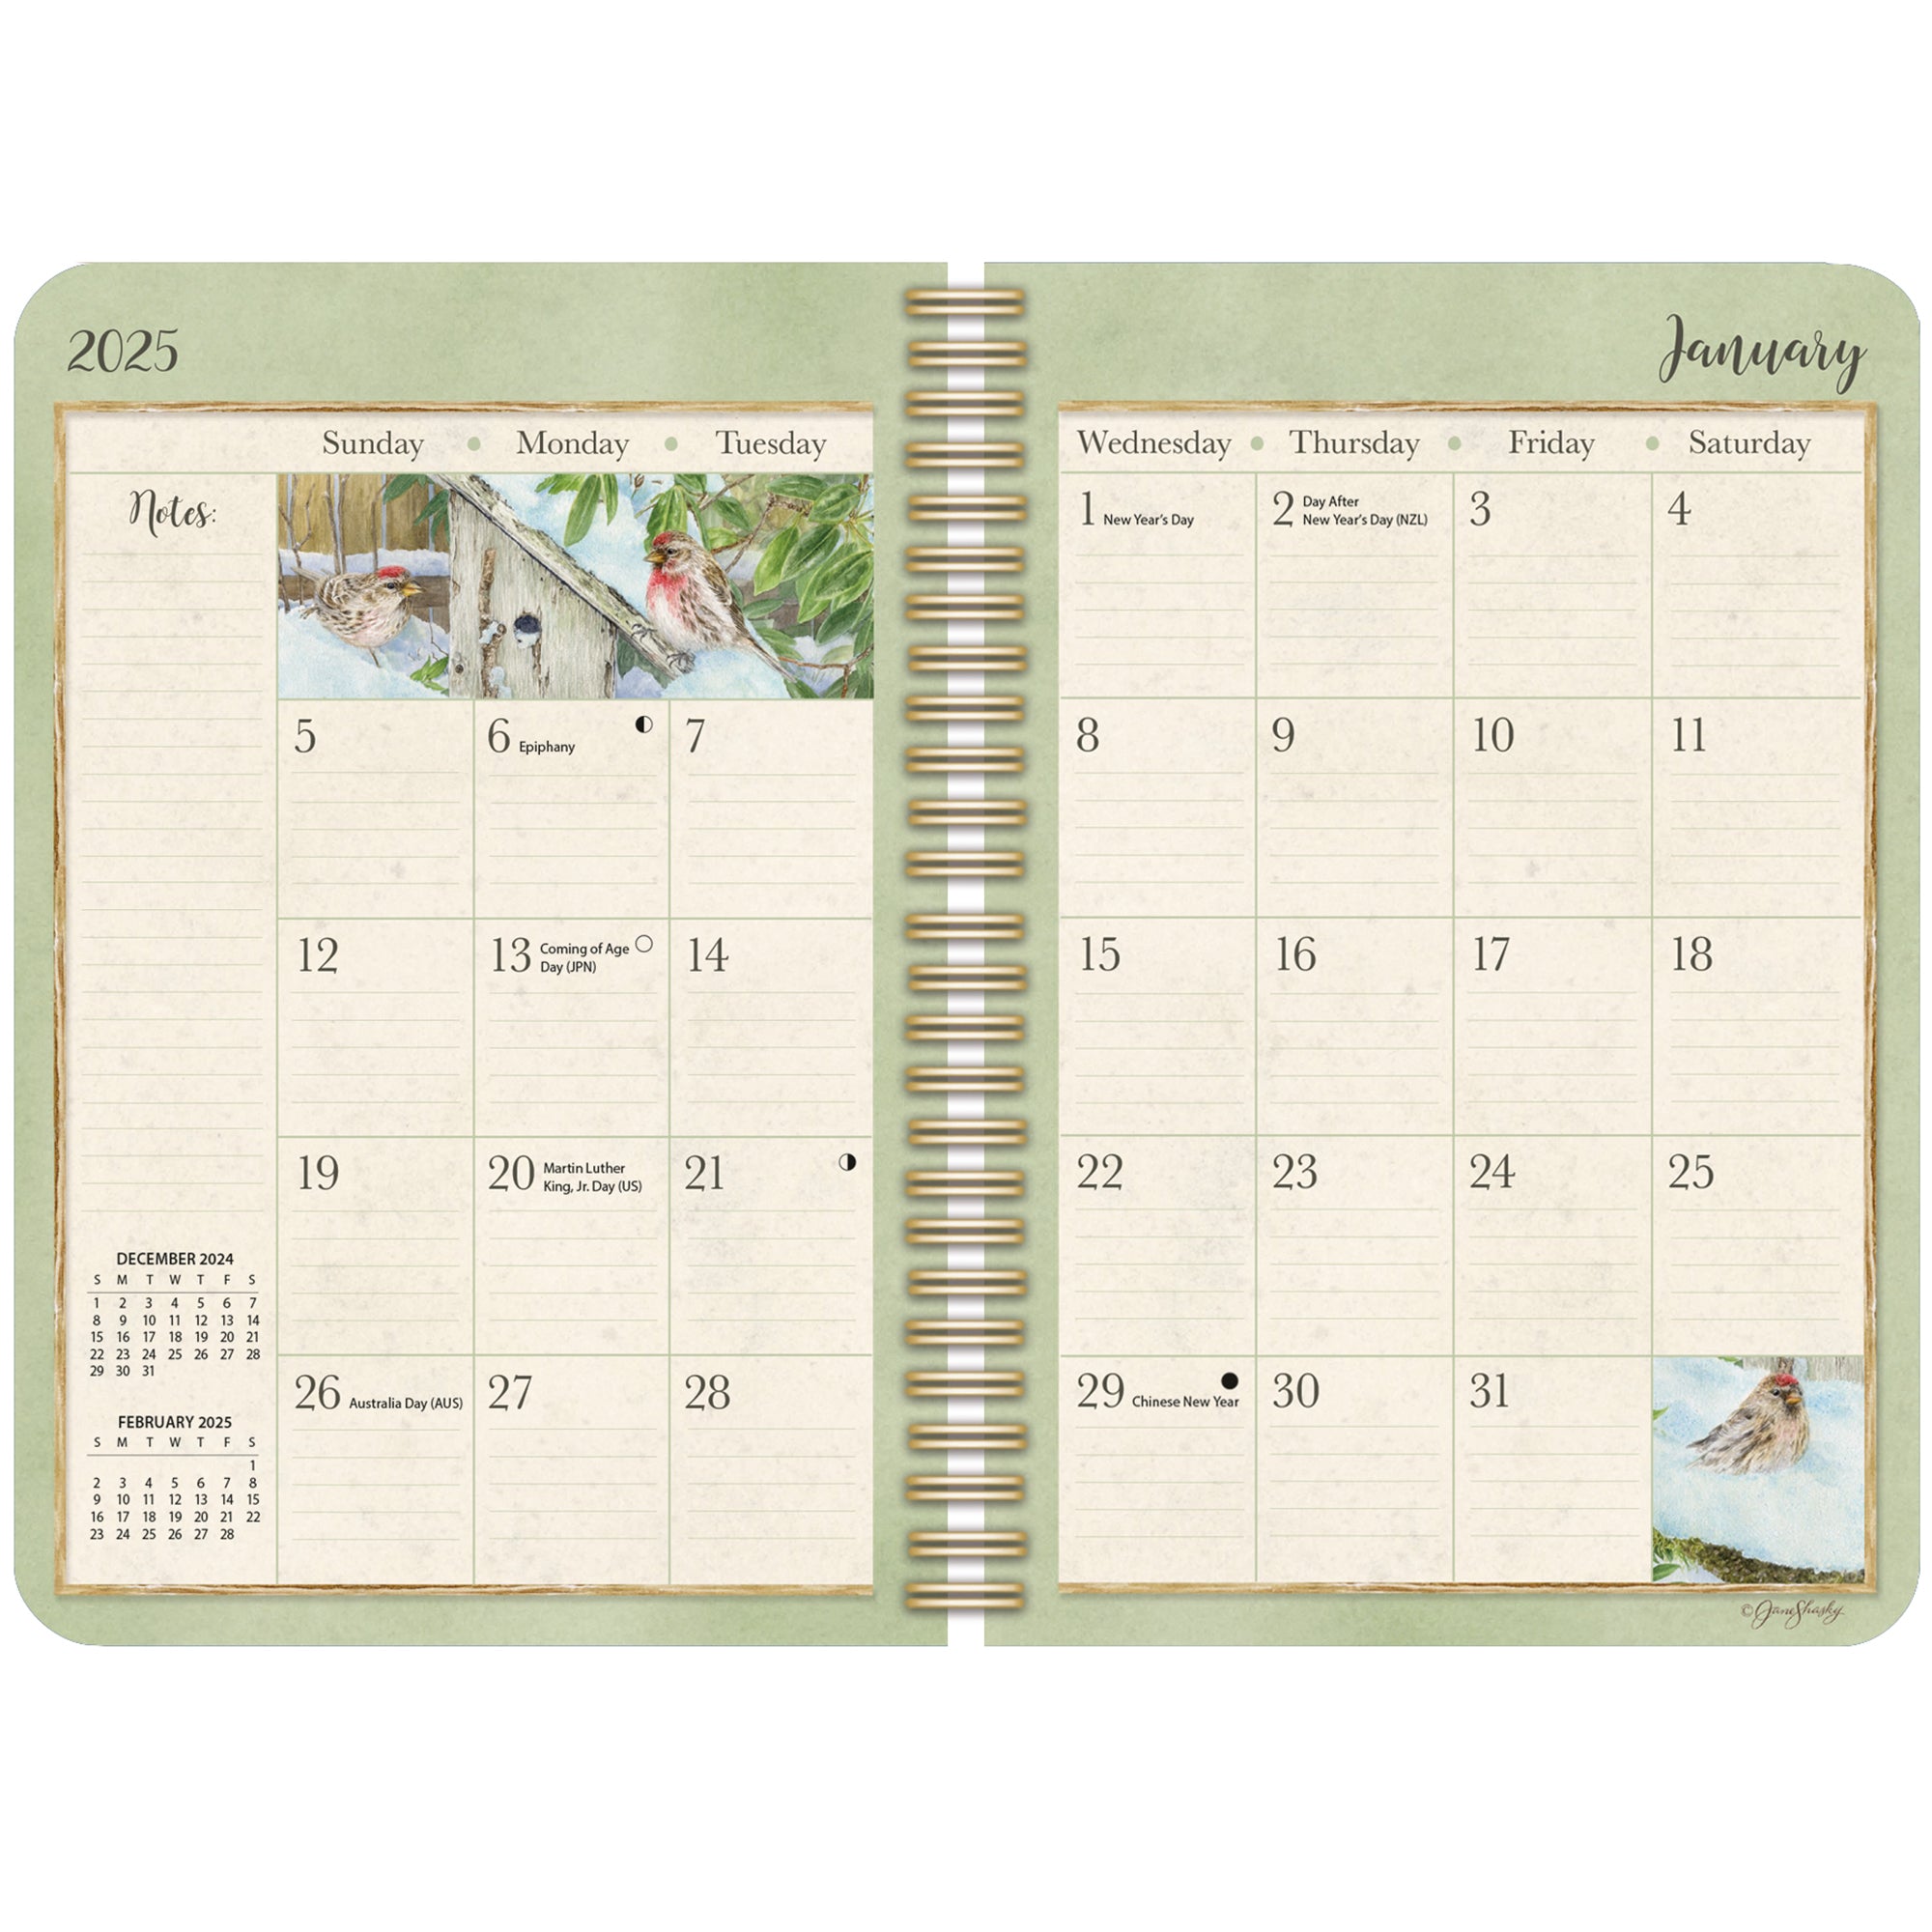 2025 LANG Birds In The Garden - Monthly Engagement Diary/Planner